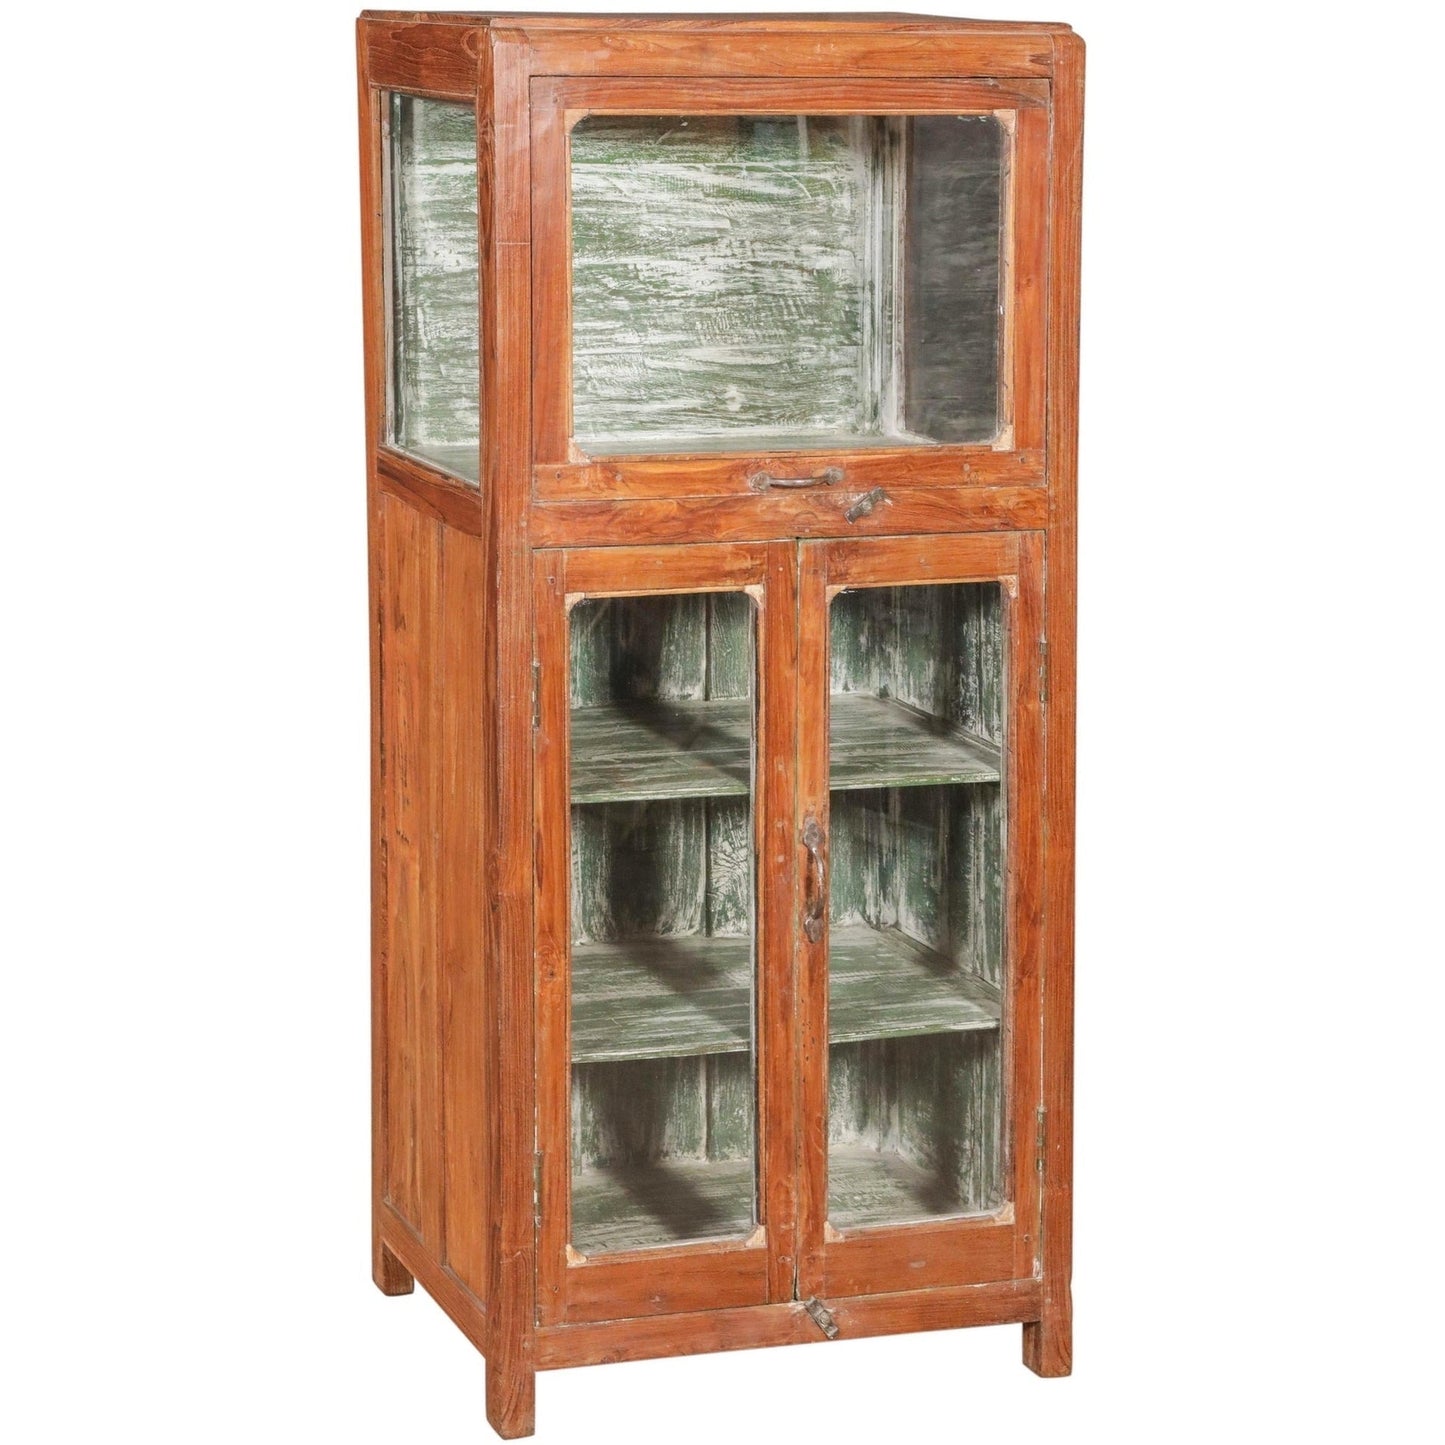 Wooden Cabinet With Glass, Height: 56 in